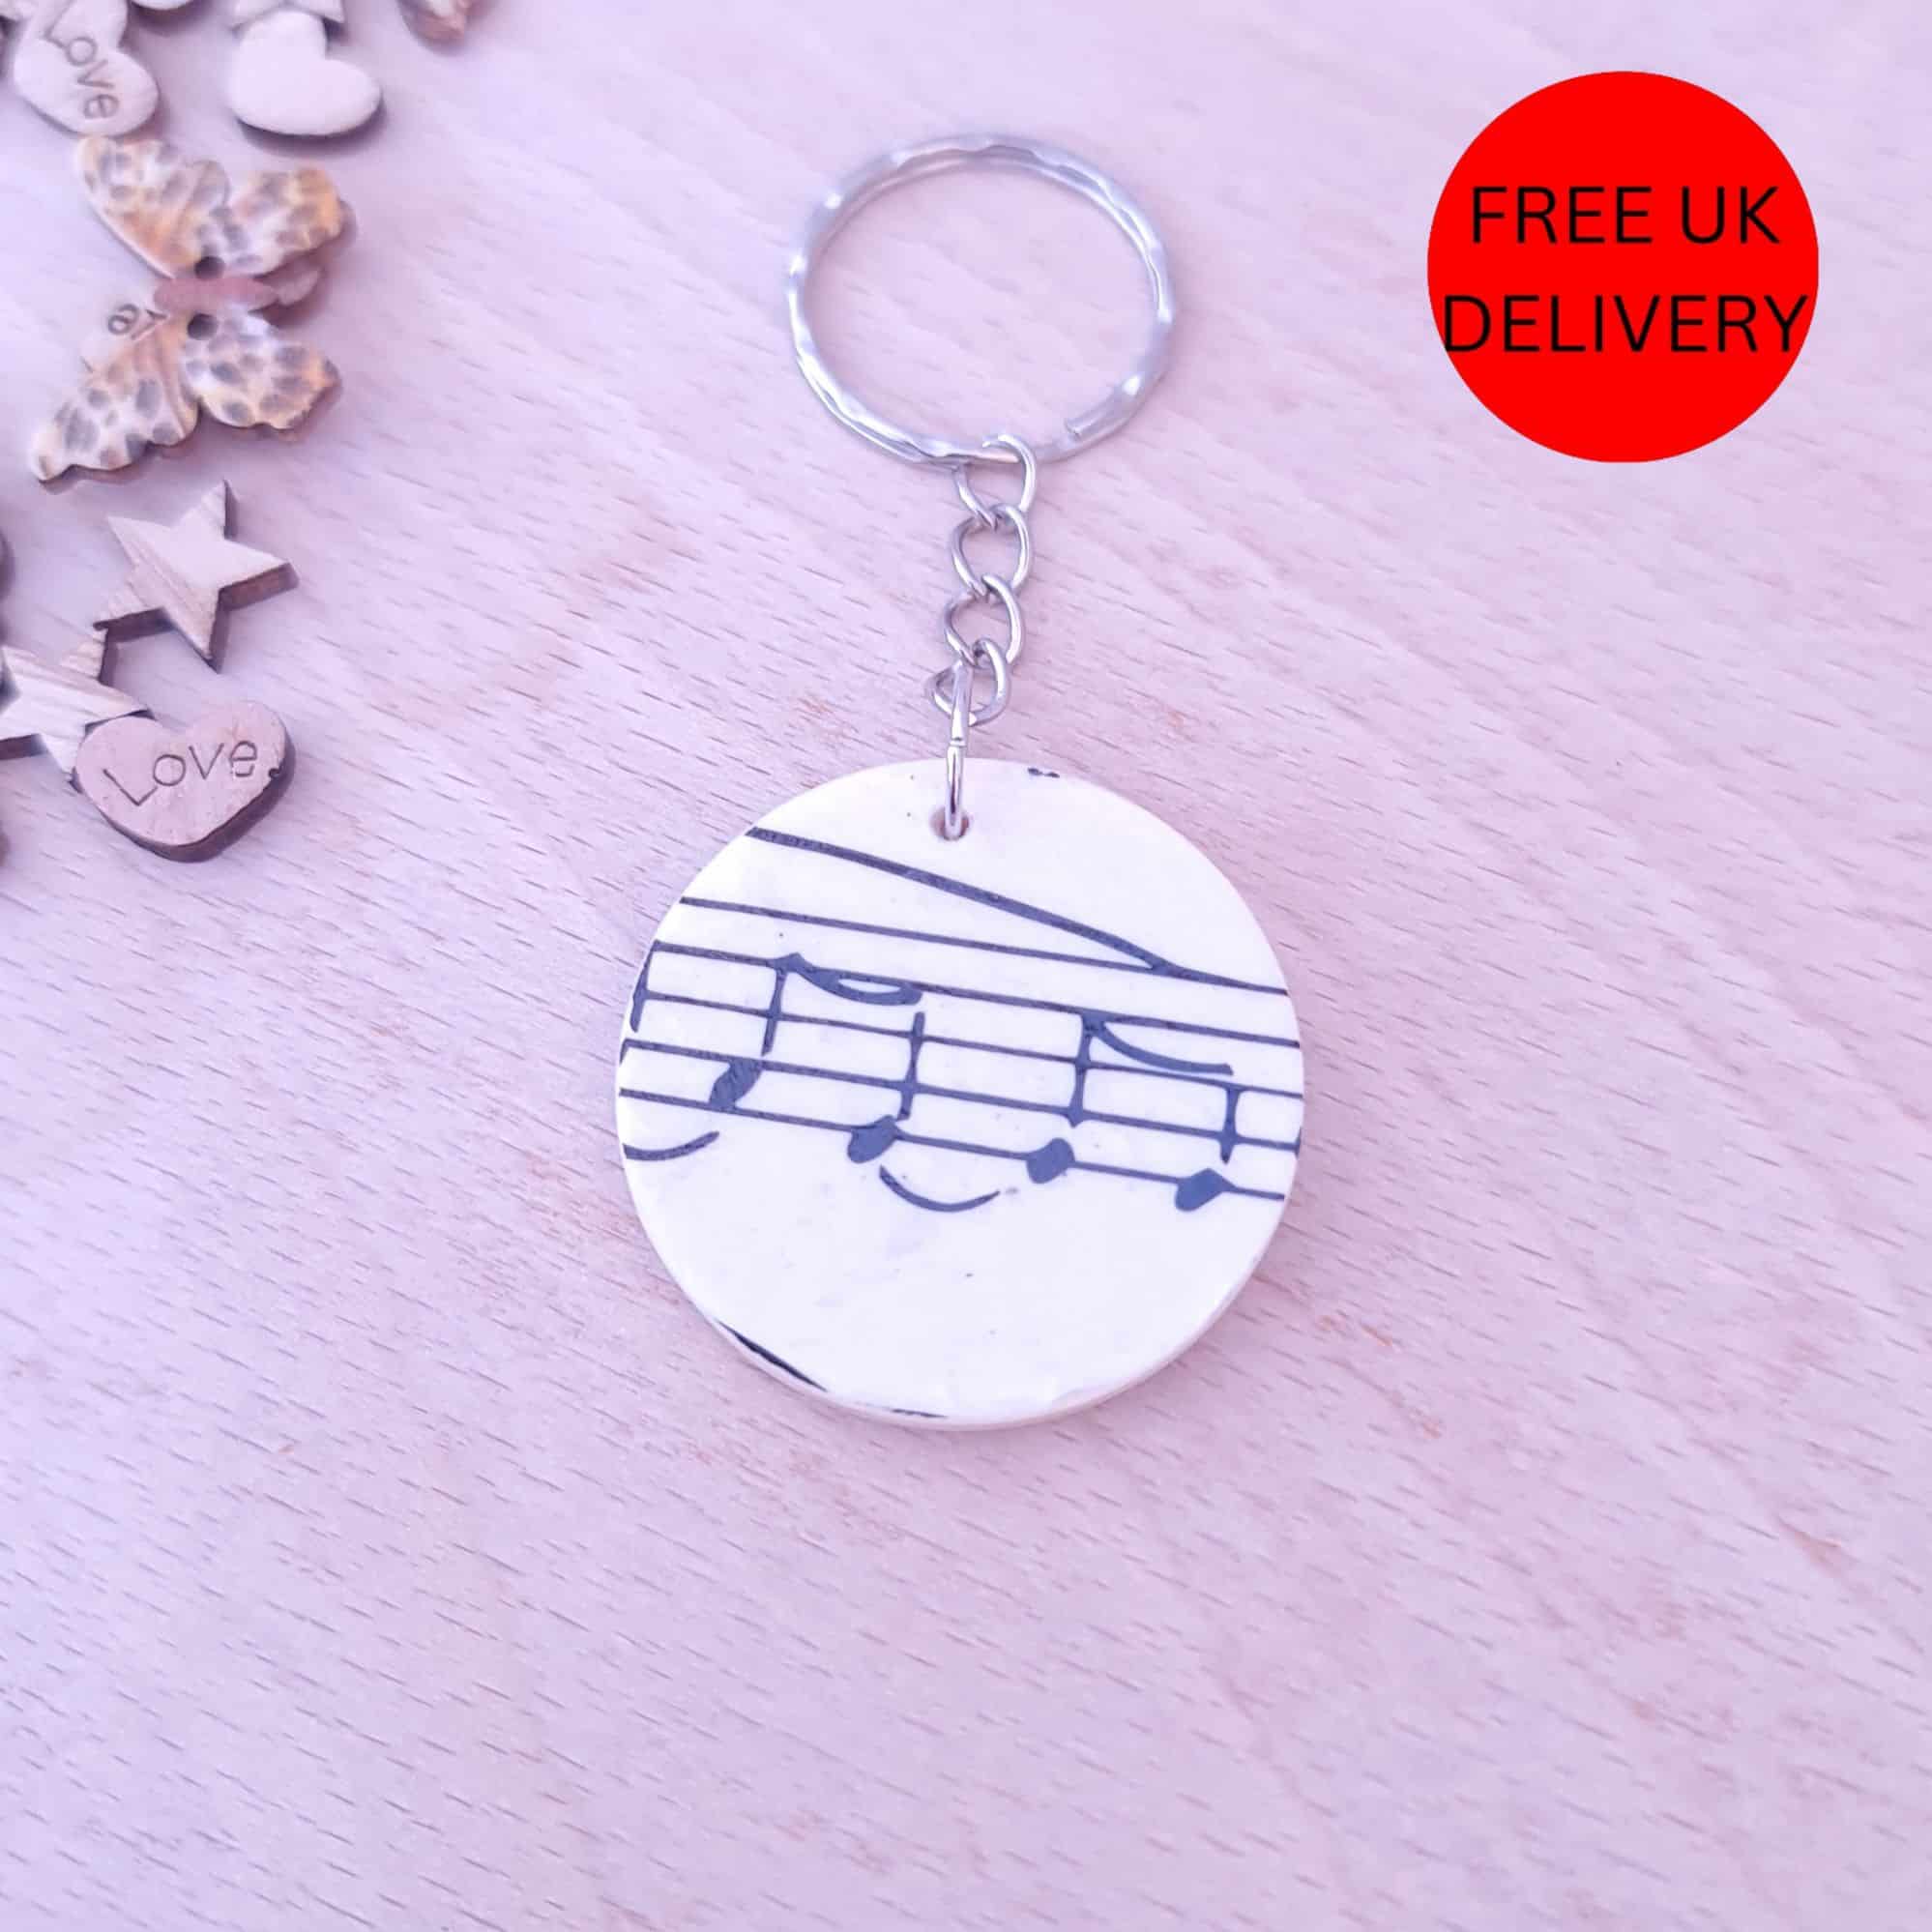 Handmade Musical Notes Wooden Decoupaged Round Keyring – FREE UK DELIVERY - main product image